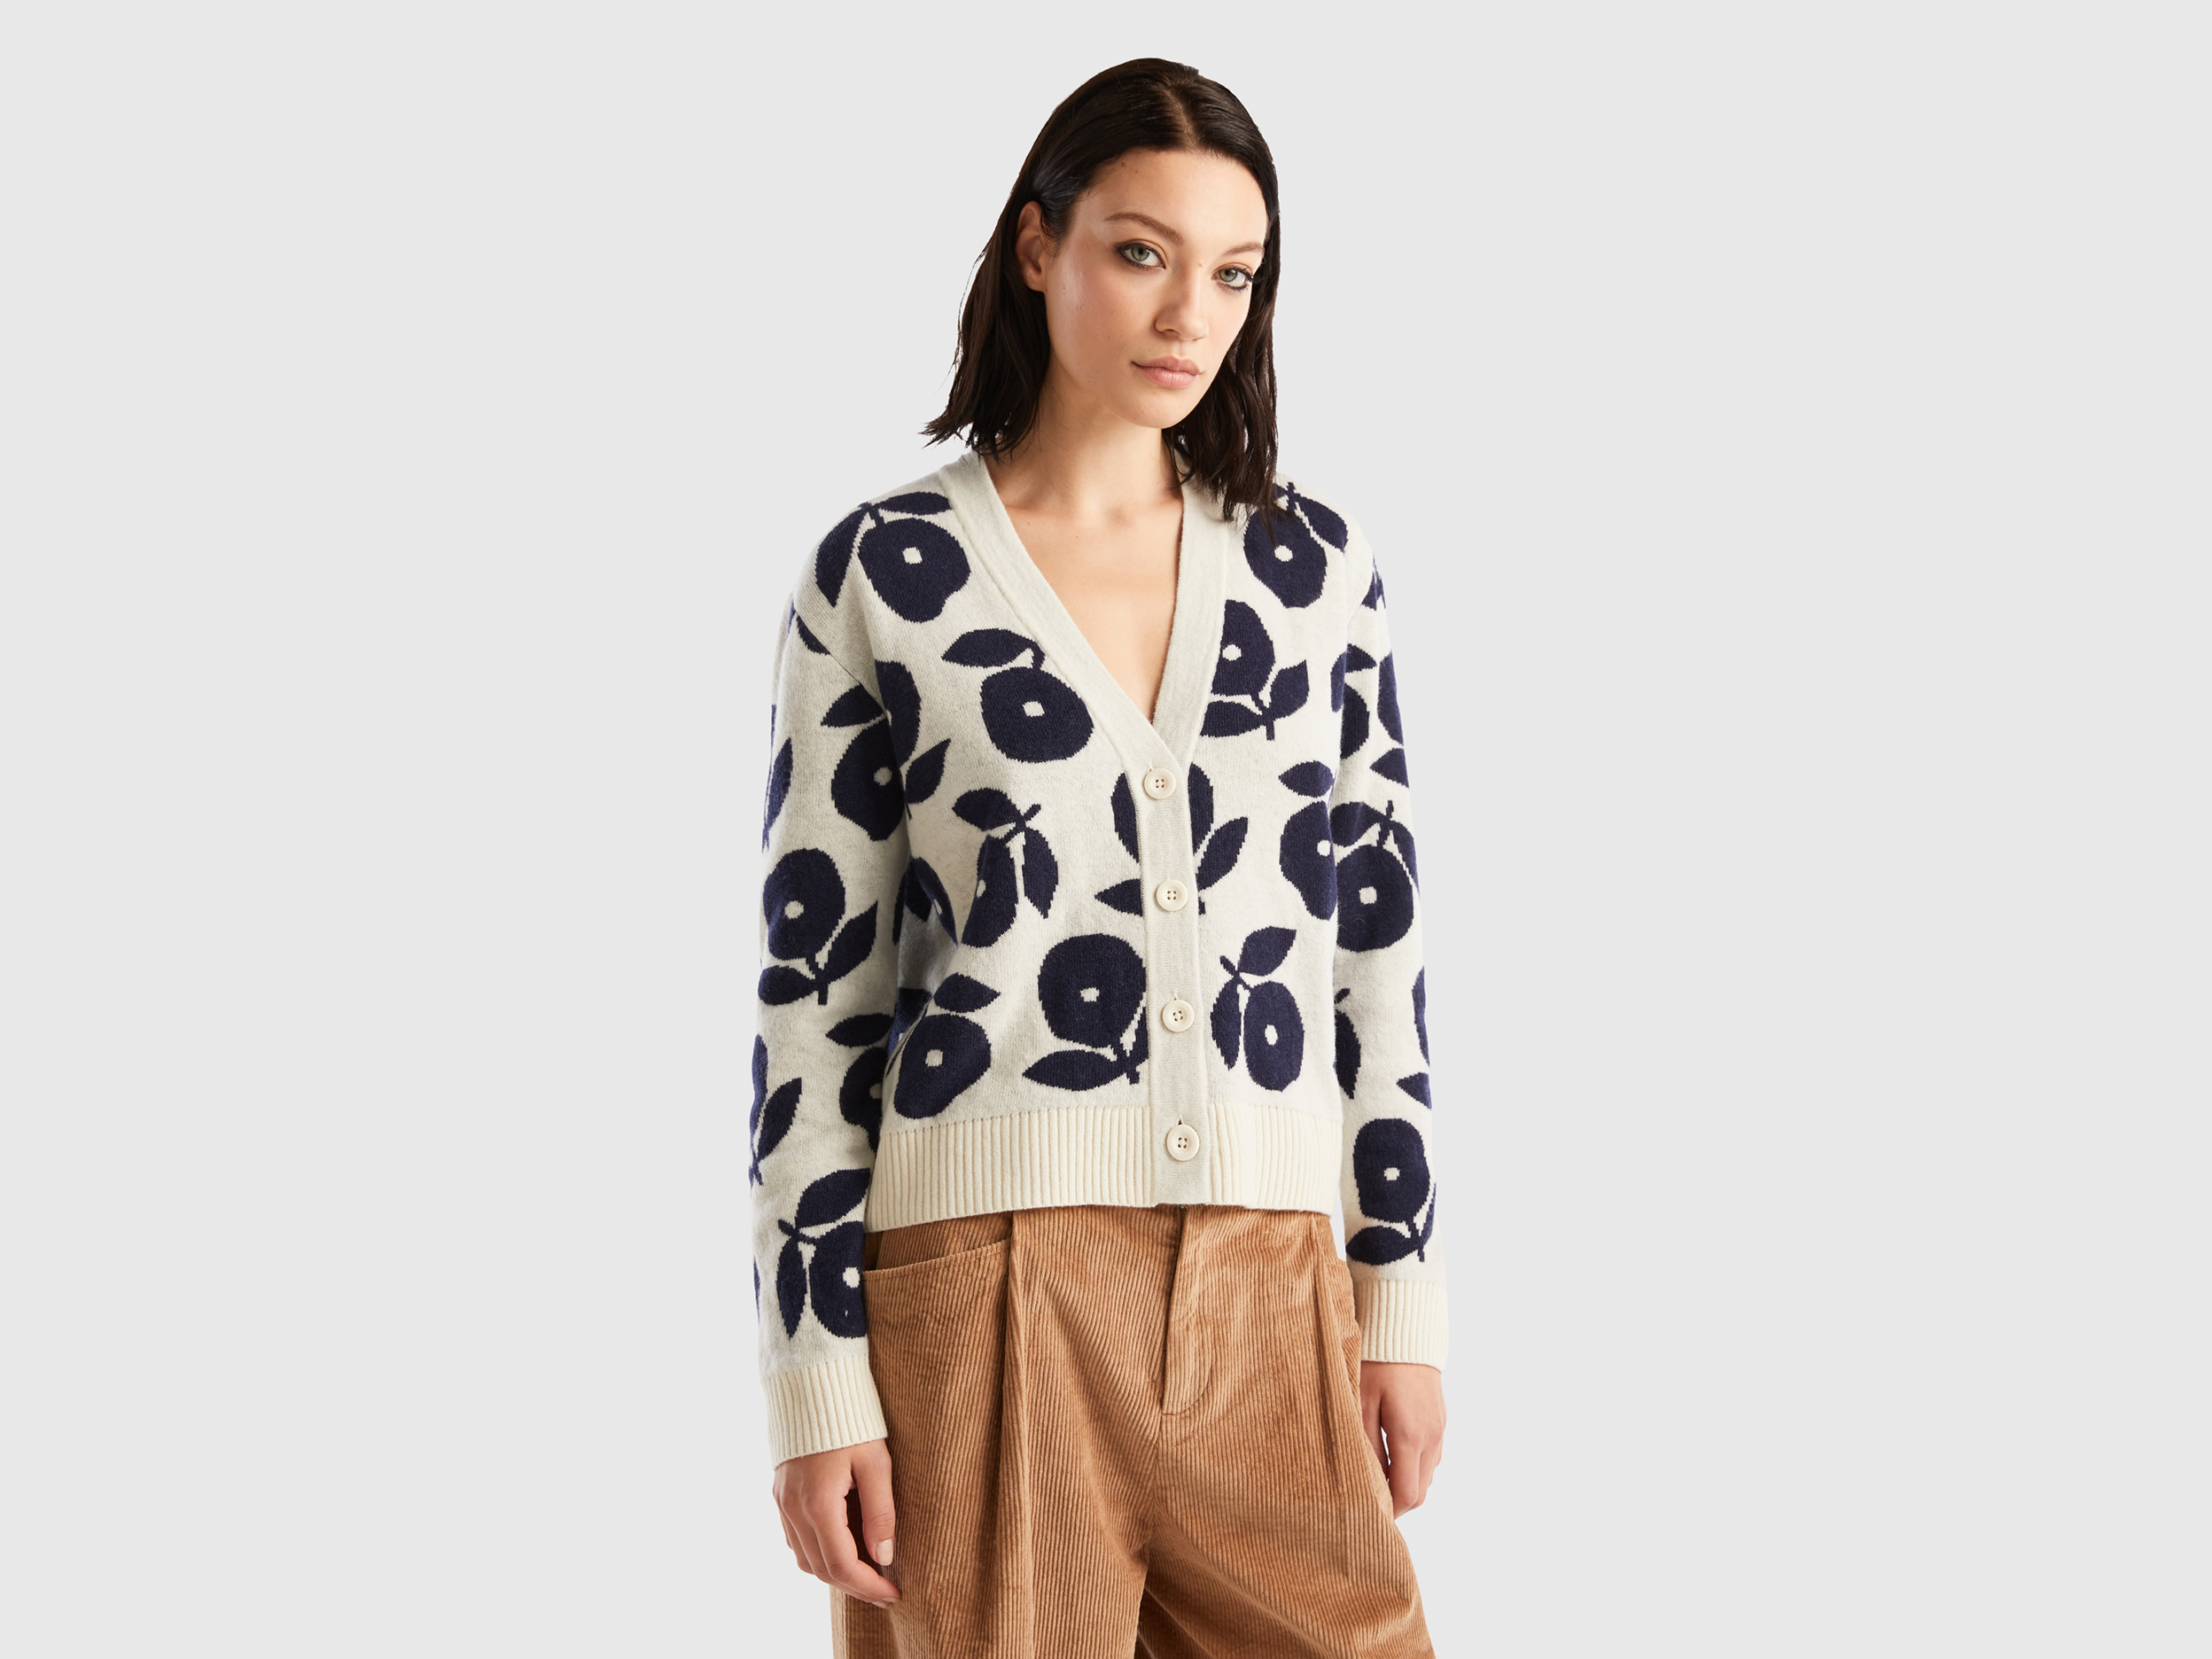 Benetton, Cardigan With Floral Inlays, size M, Creamy White, Women